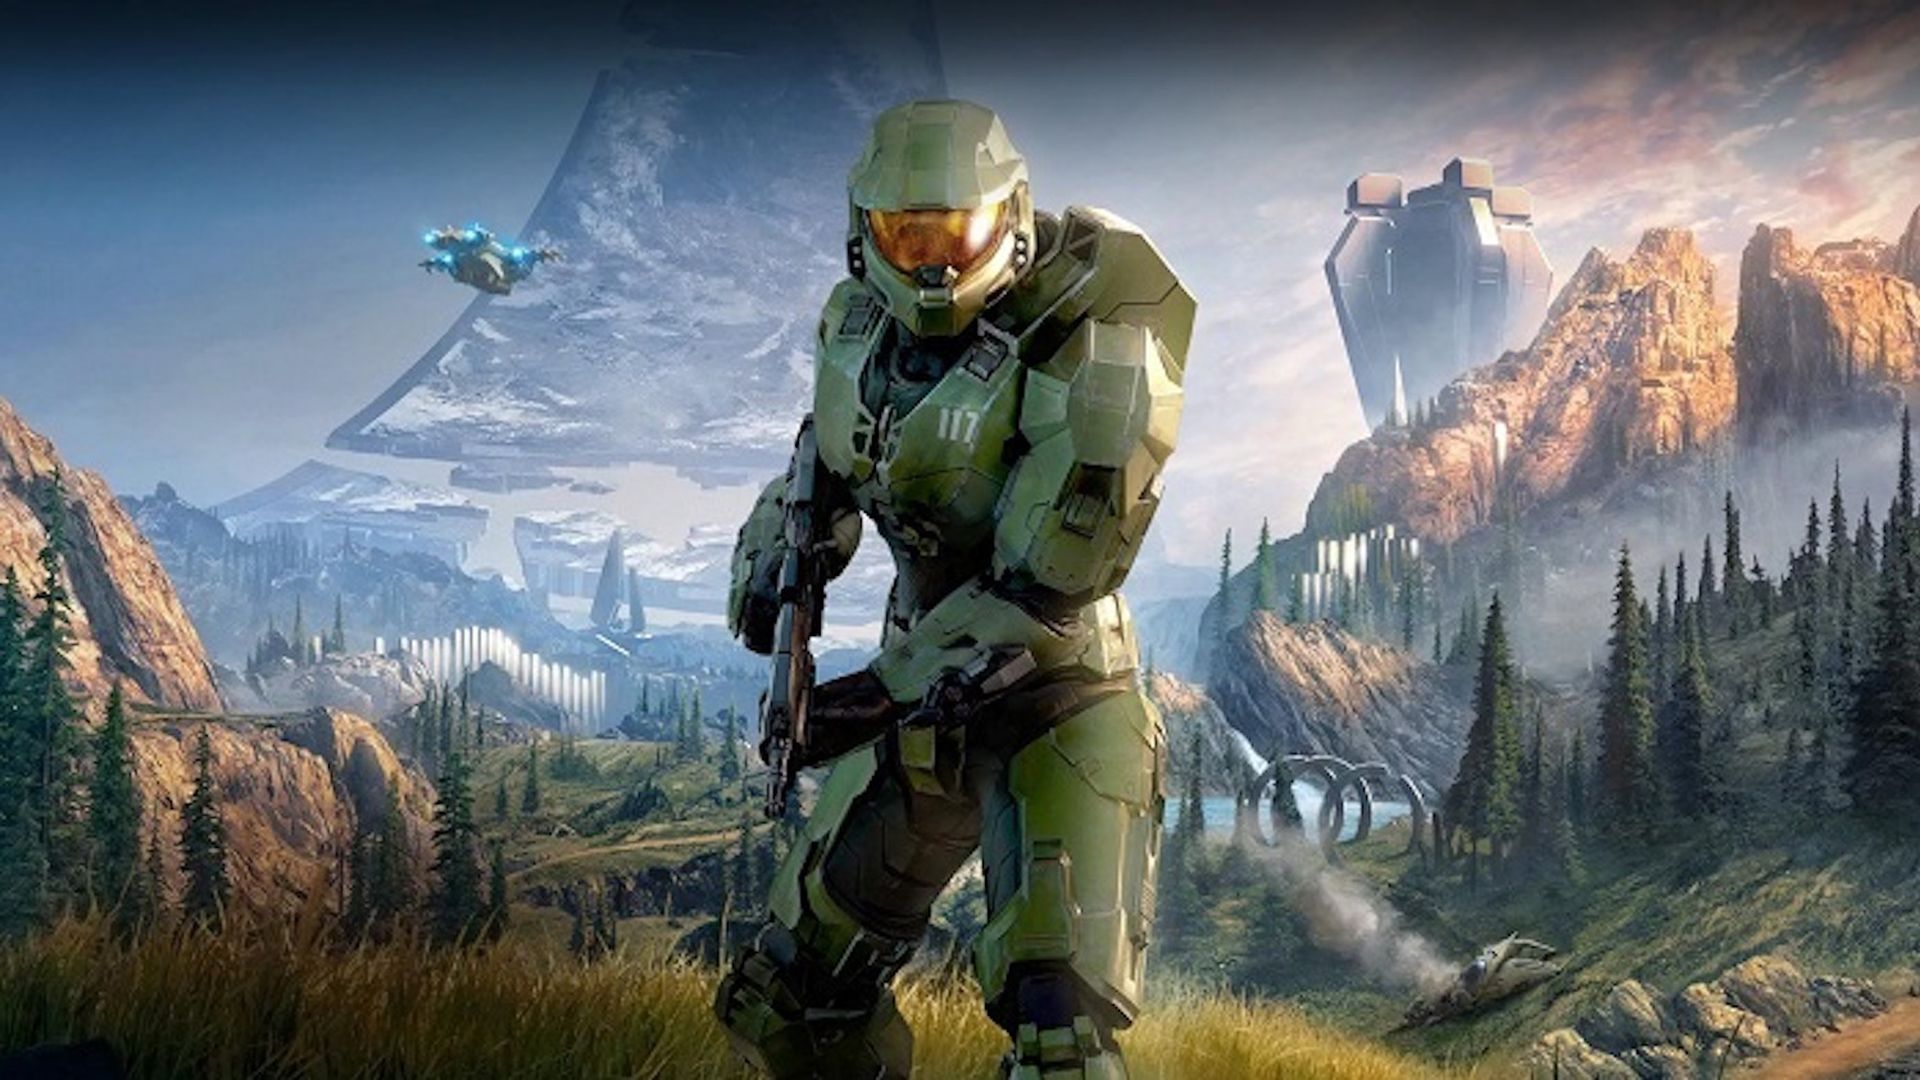 Illustration of Halo hero Master Chief standing in front of a field